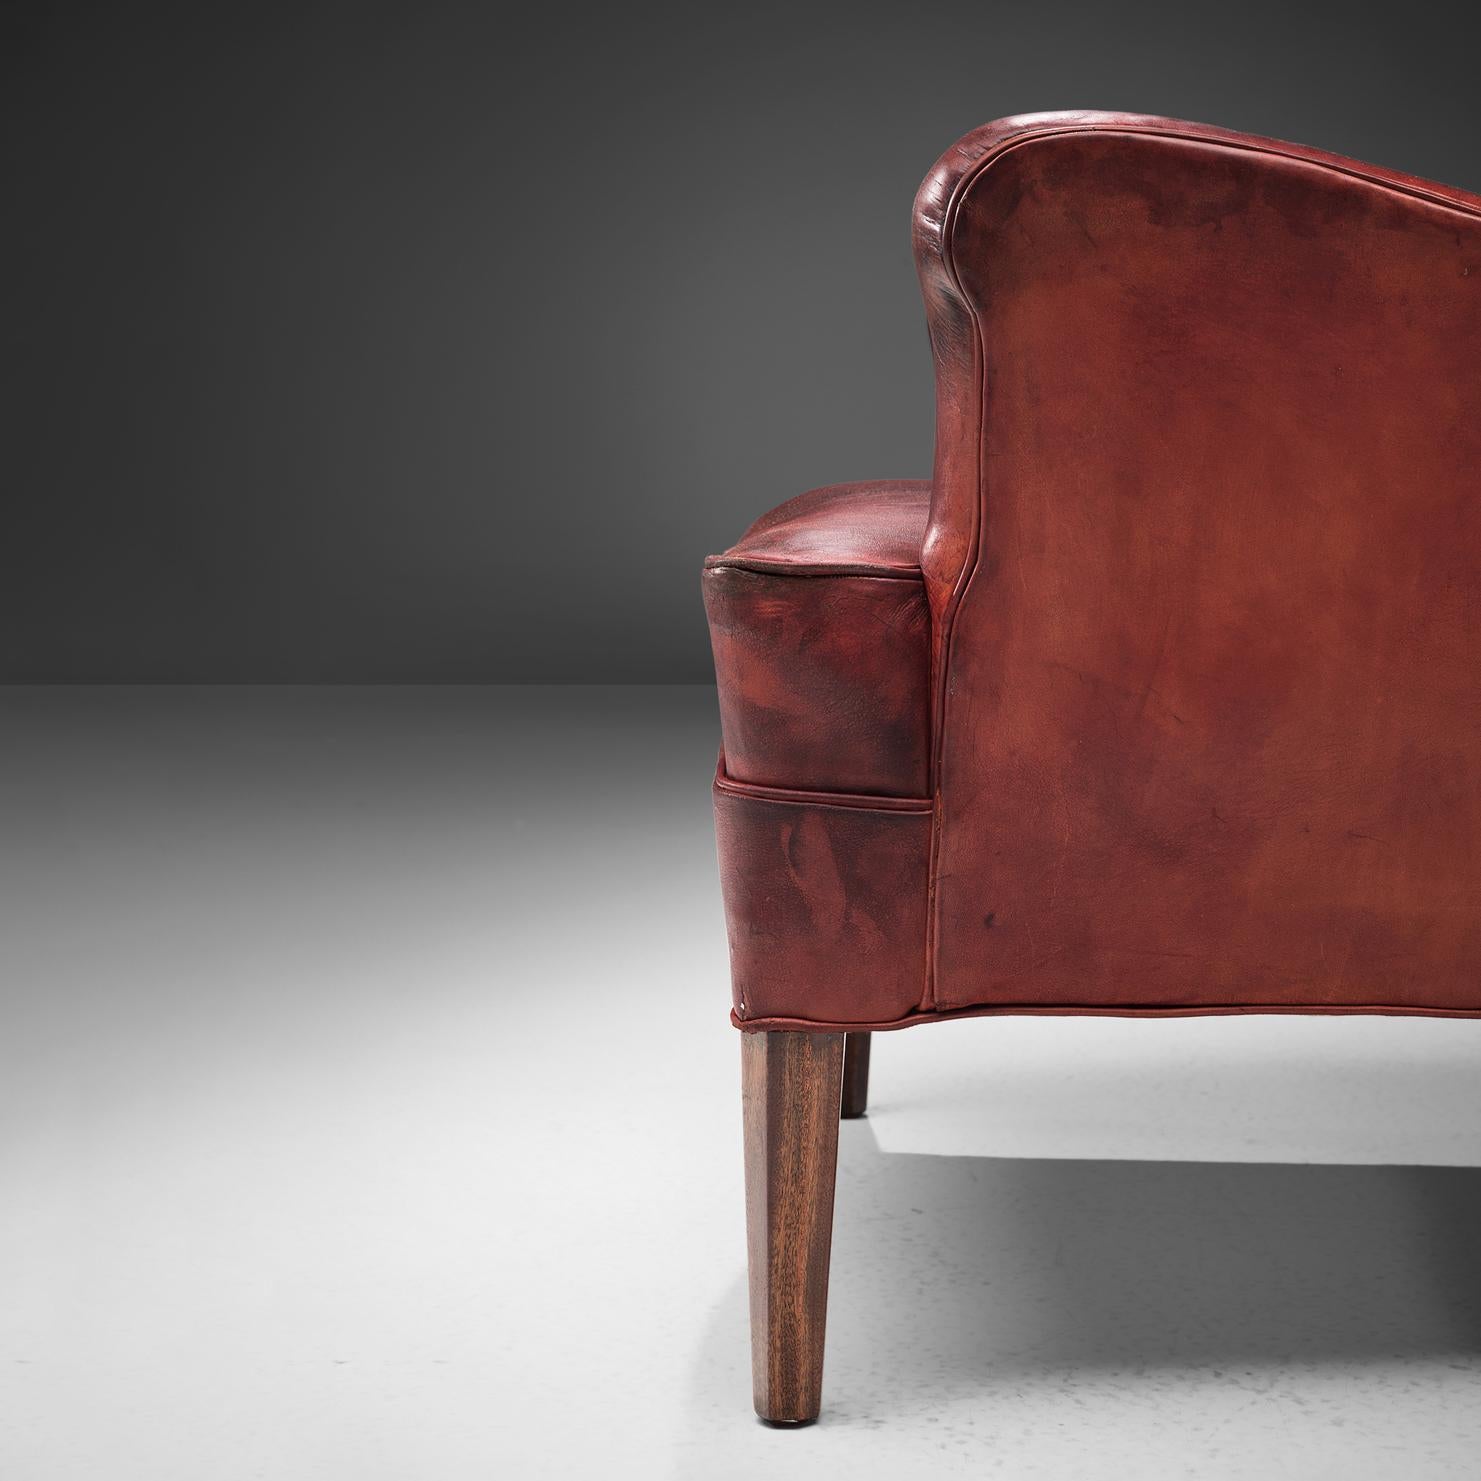 Mid-20th Century Frits Heningsen Lounge Chair with Ottoman in Original Burgundy Leather